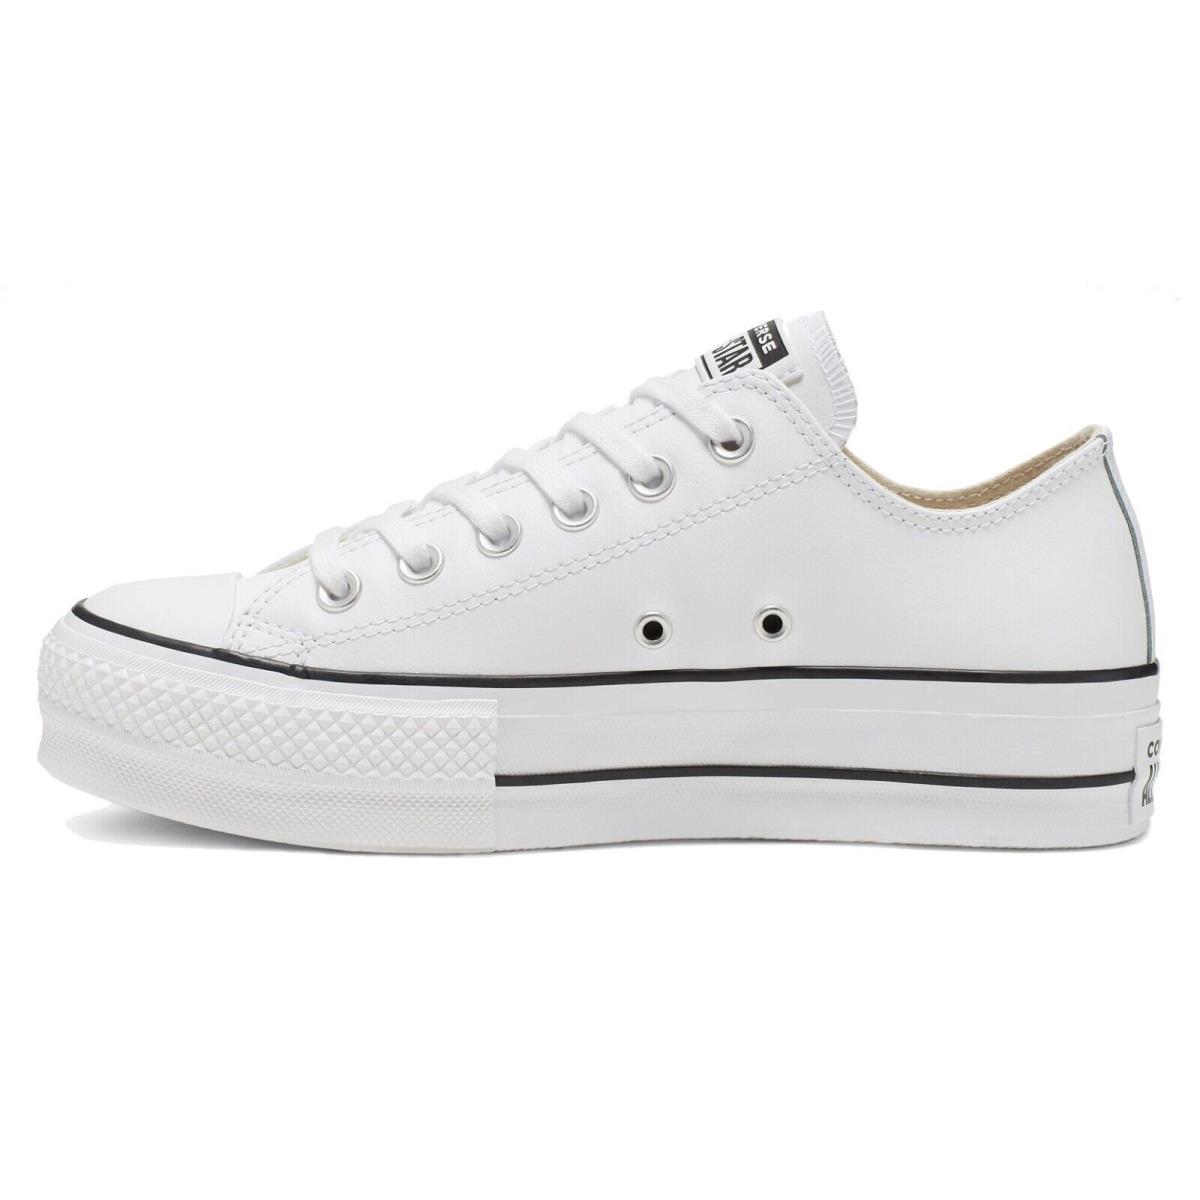 Converse Chuck Taylor All Star Lift Platform Leather Women`s Shoes Sneakers White